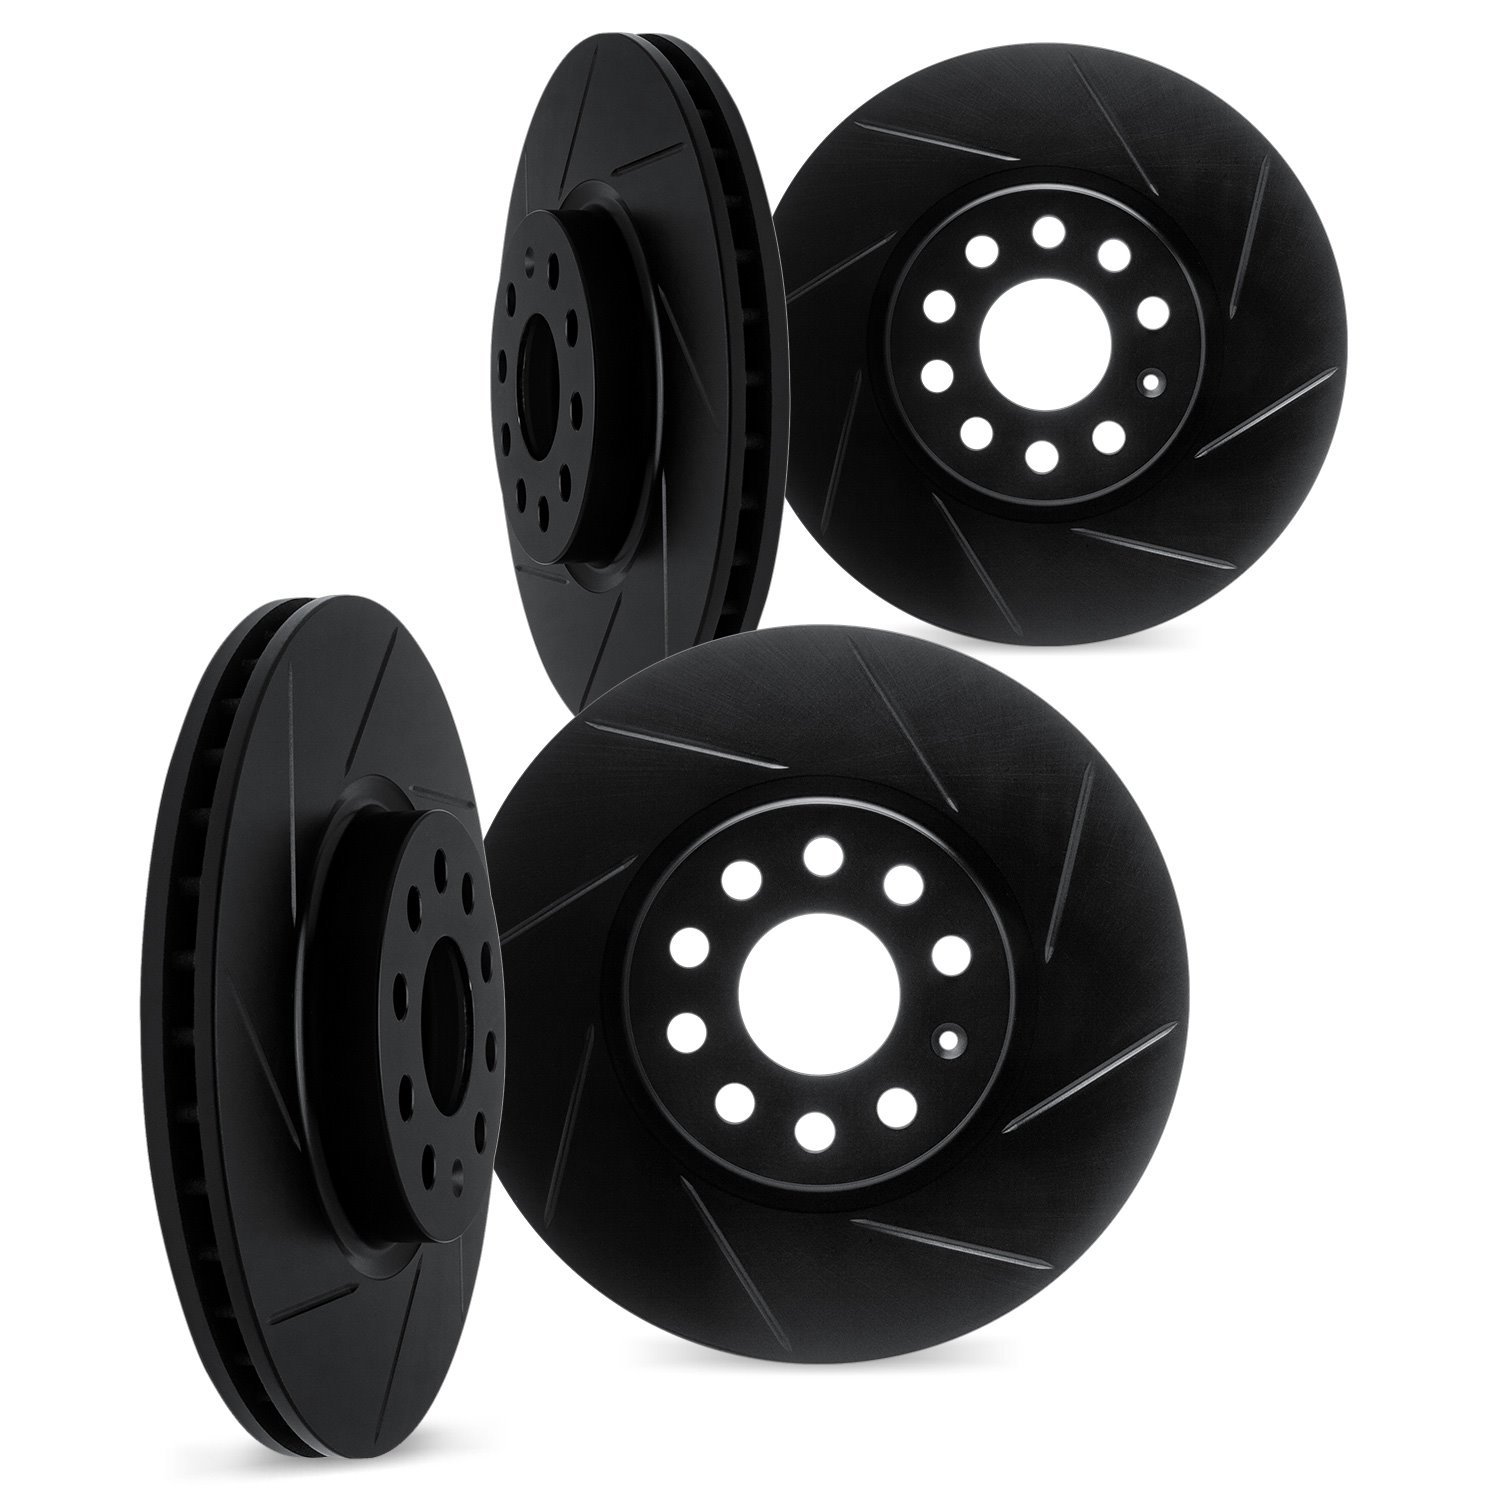 3004-68000 Slotted Brake Rotors [Black], Fits Select Infiniti/Nissan, Position: Front and Rear